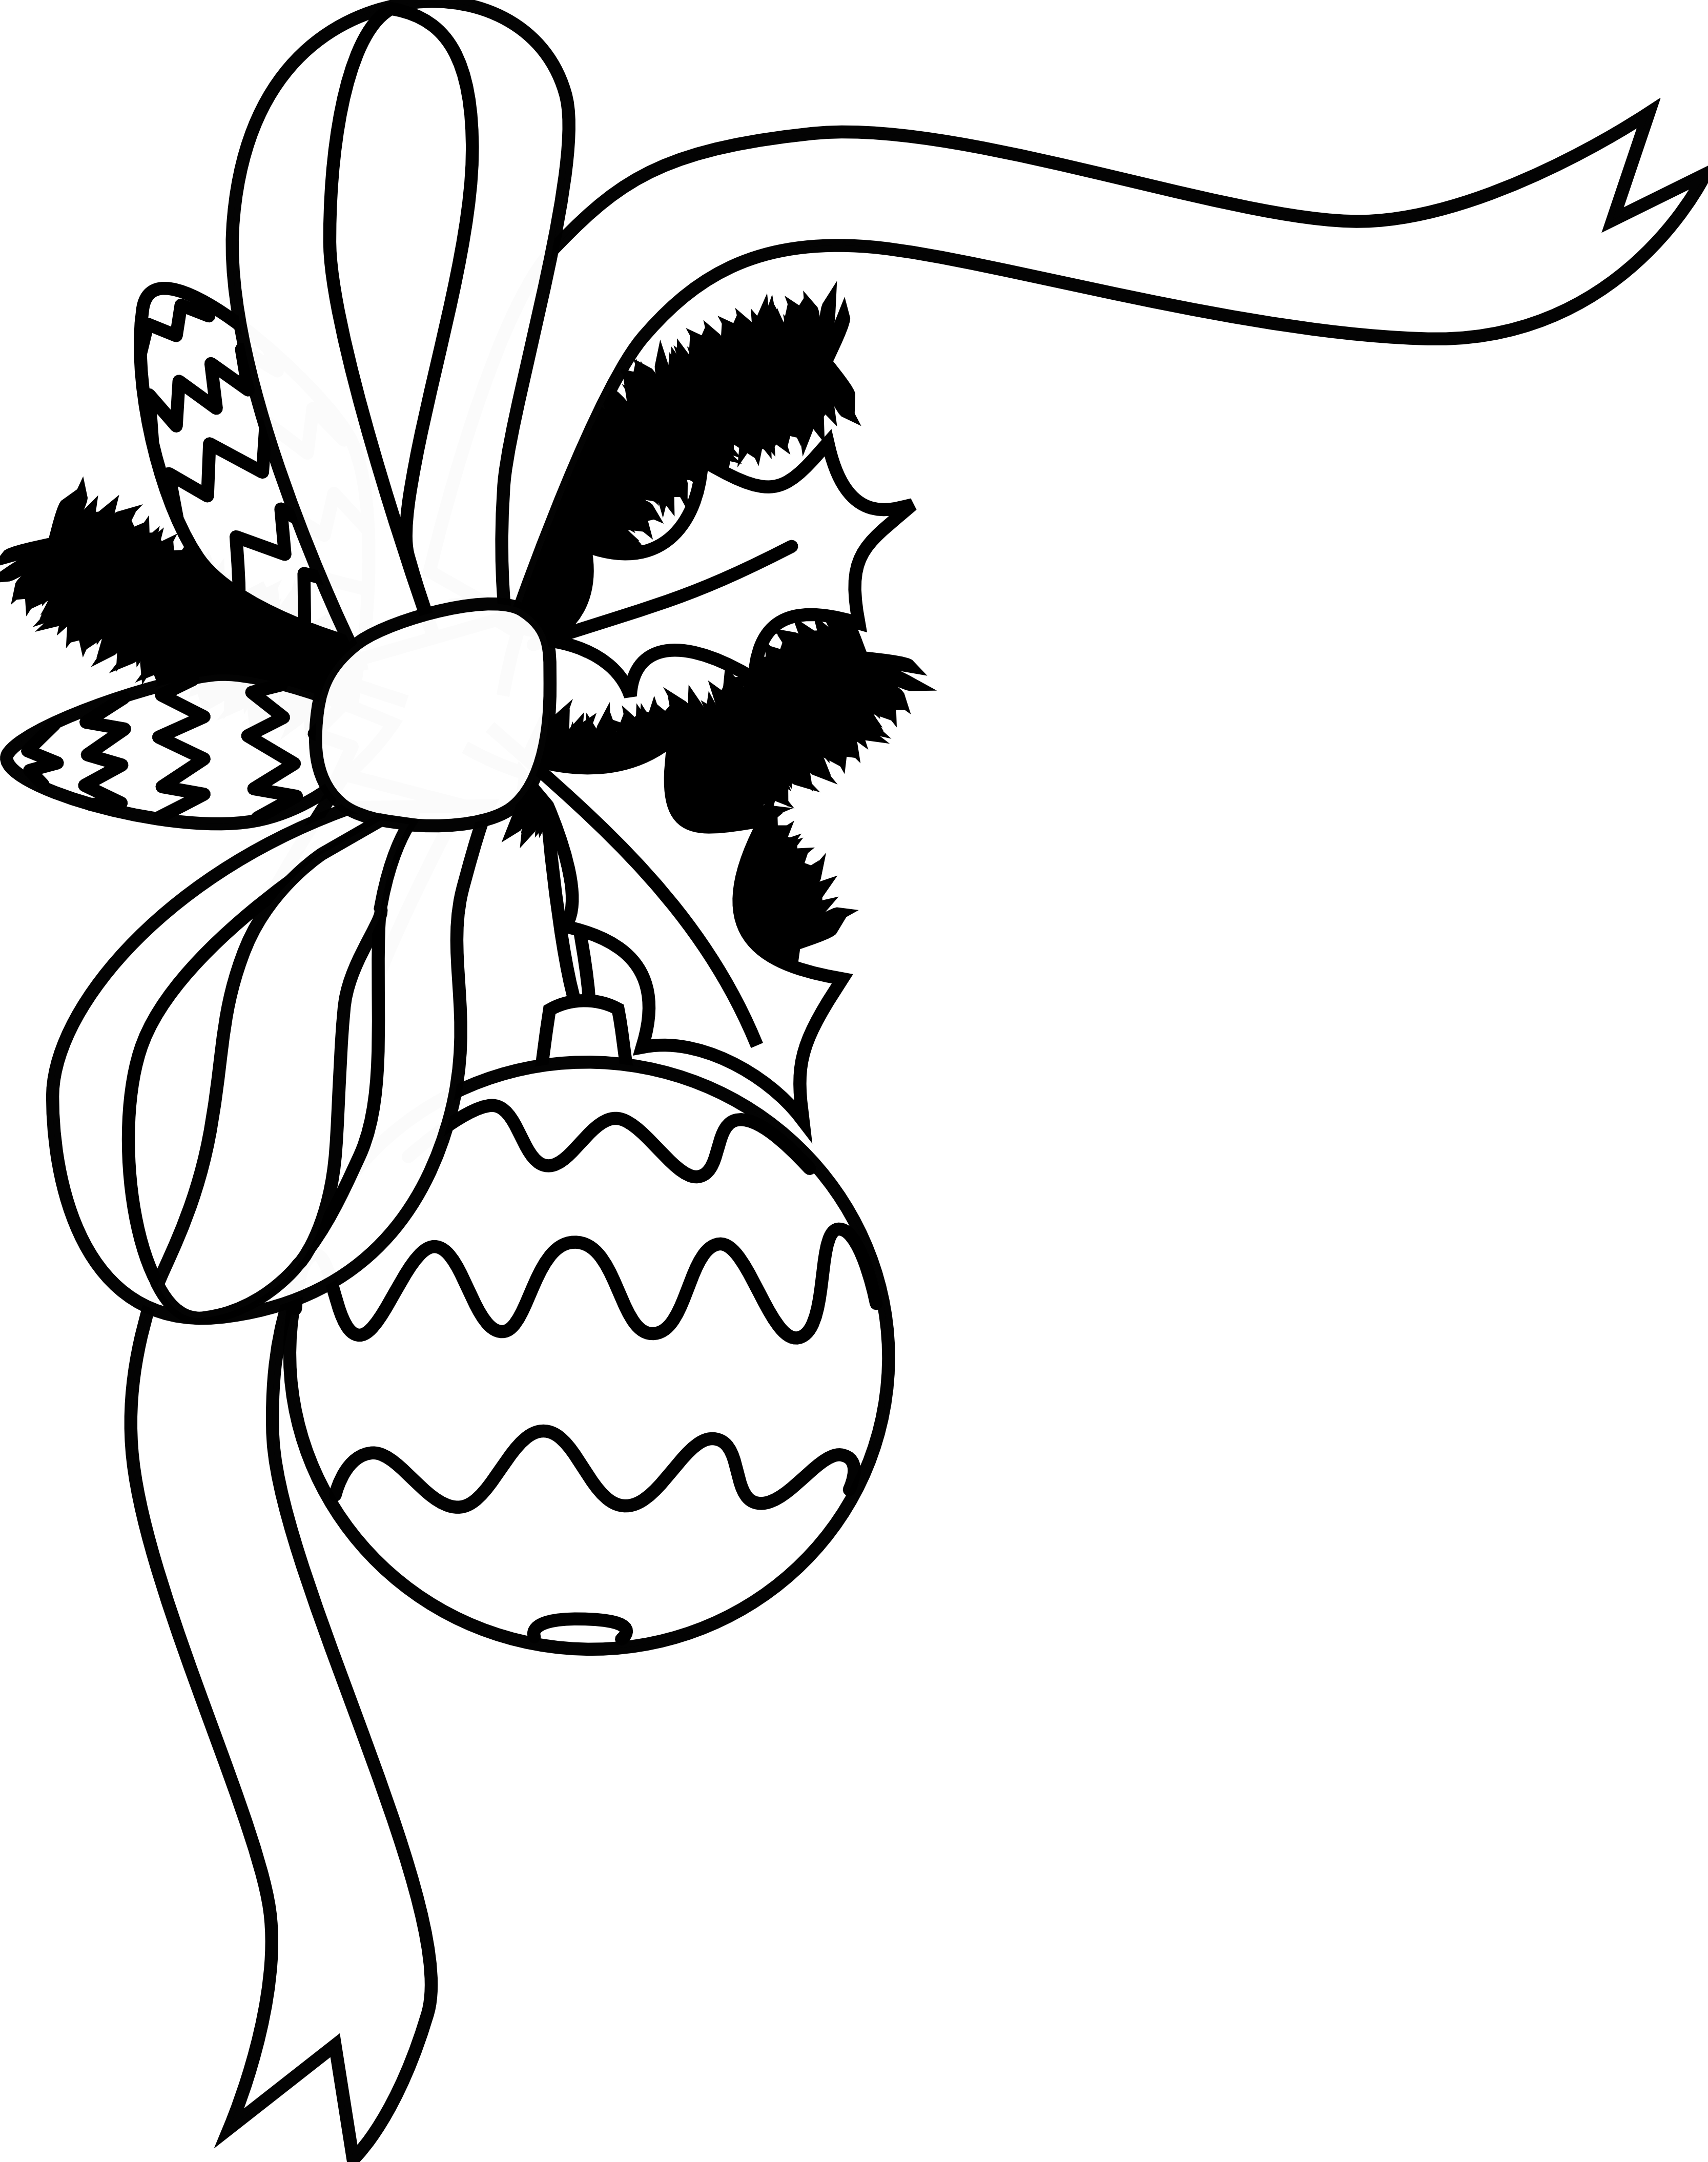 free-christmas-clip-art-black-and-white-download-free-christmas-clip